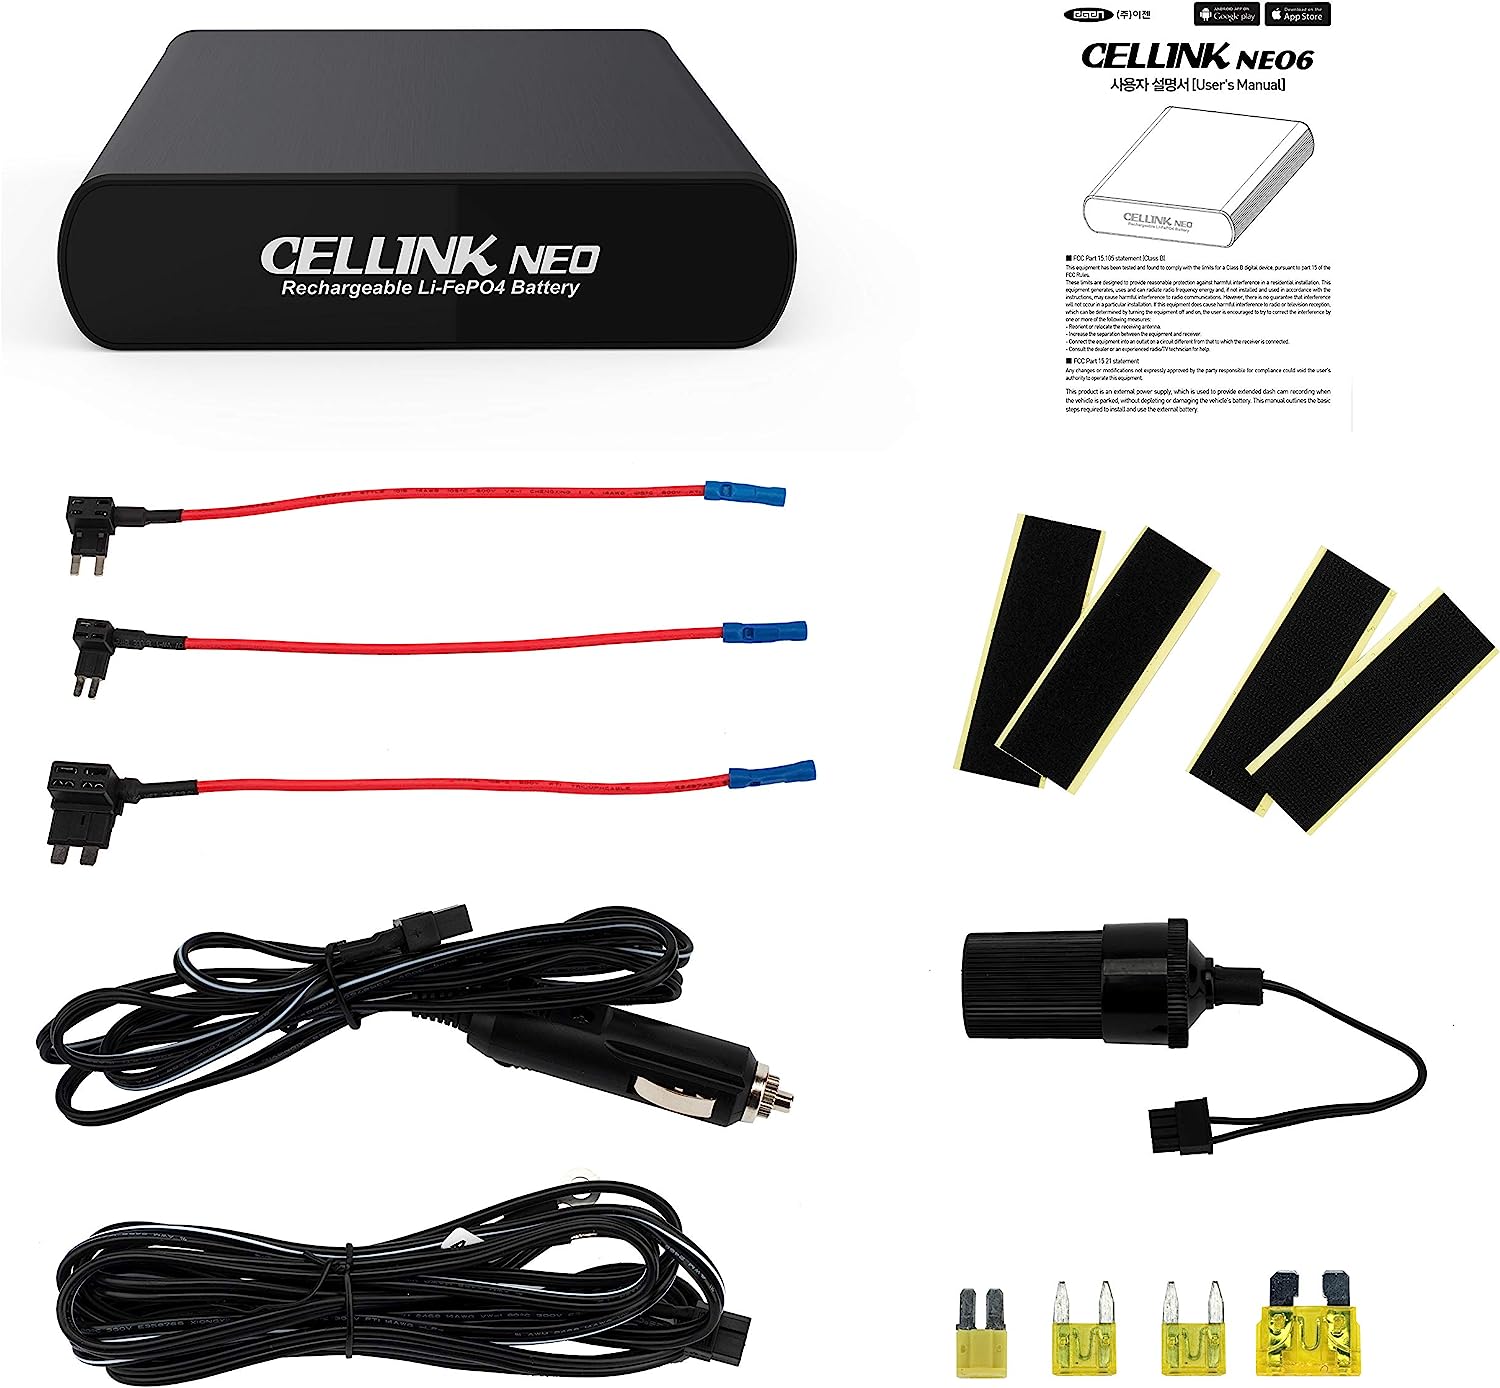 Cellink Neo 6 Box contents: Cellink-Neo 6 Battery, User Guide, Female Cigarette Adapter, Cigarette to Battery Cable, Hardwiring Cable, 2x Velcro Attachment straps, blade fuses